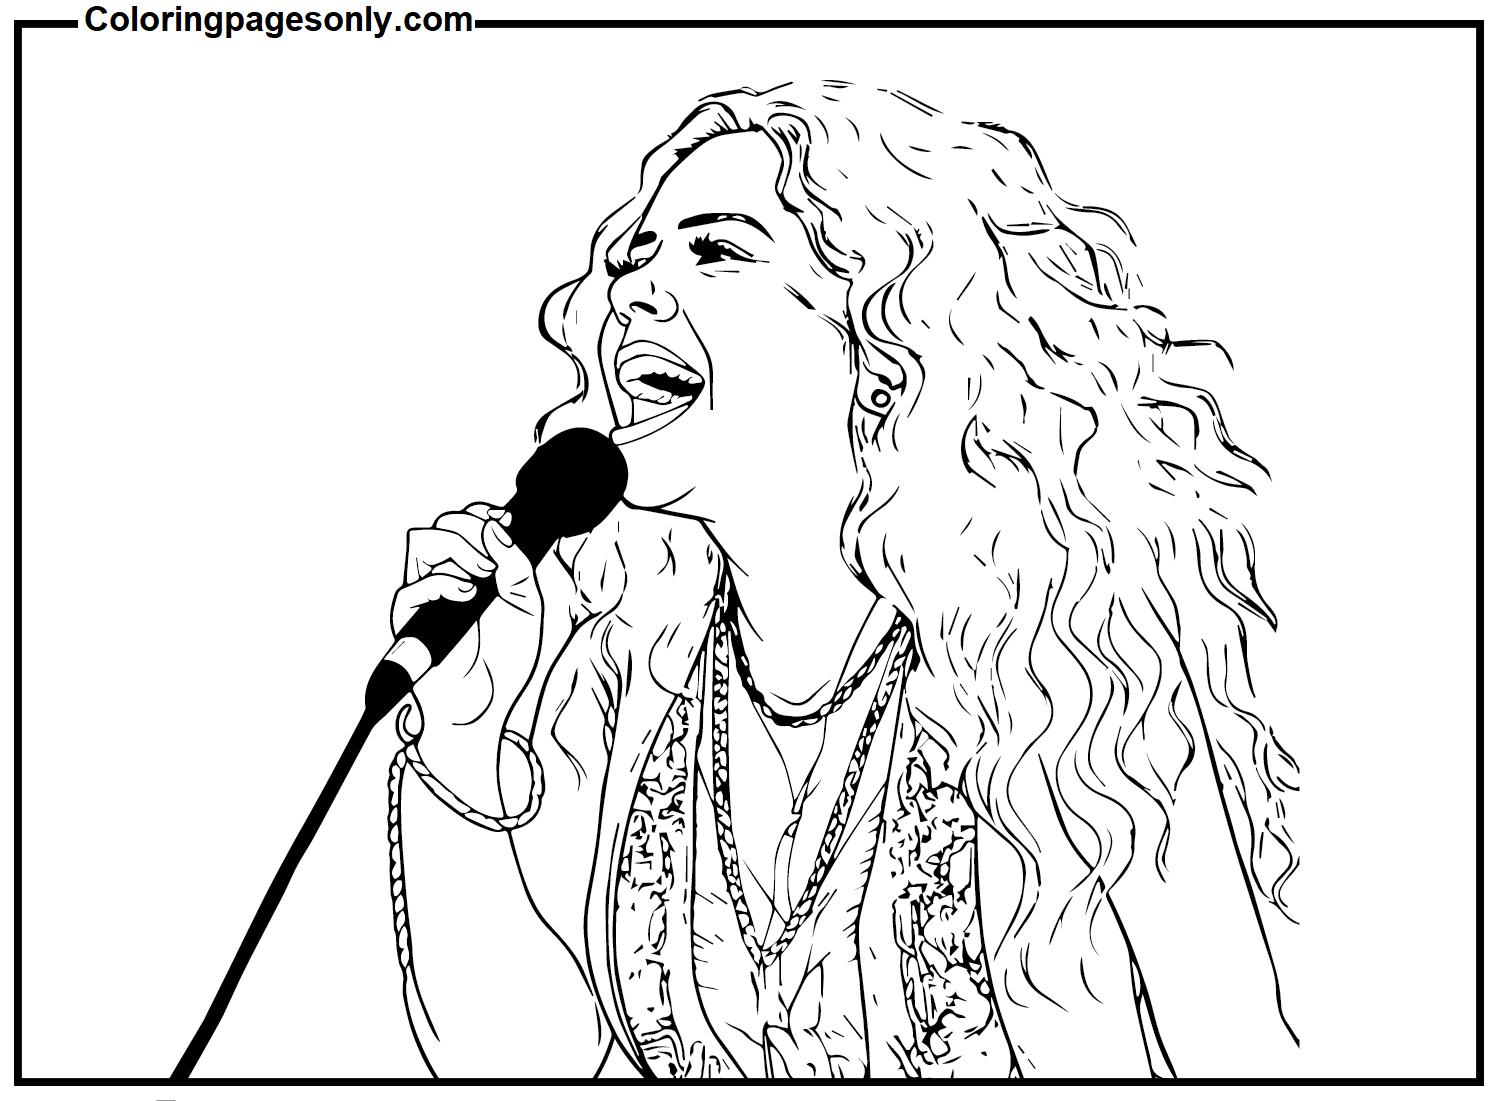 Shakira Singer Coloring Pages